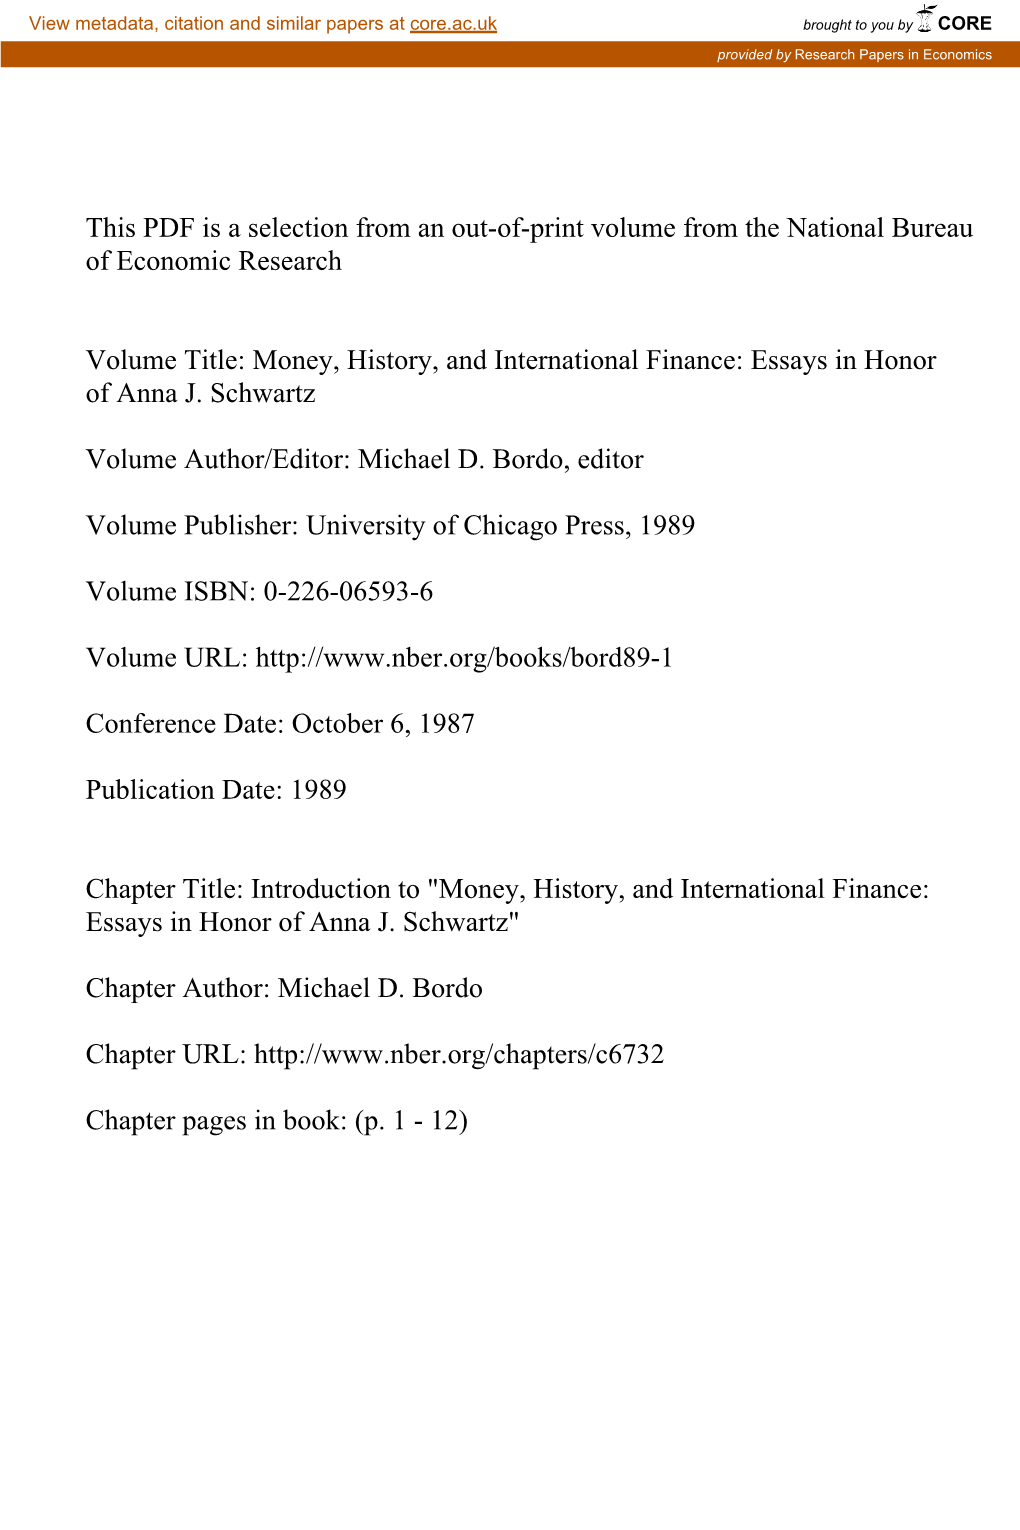 Money, History, and International Finance: Essays in Honor of Anna J